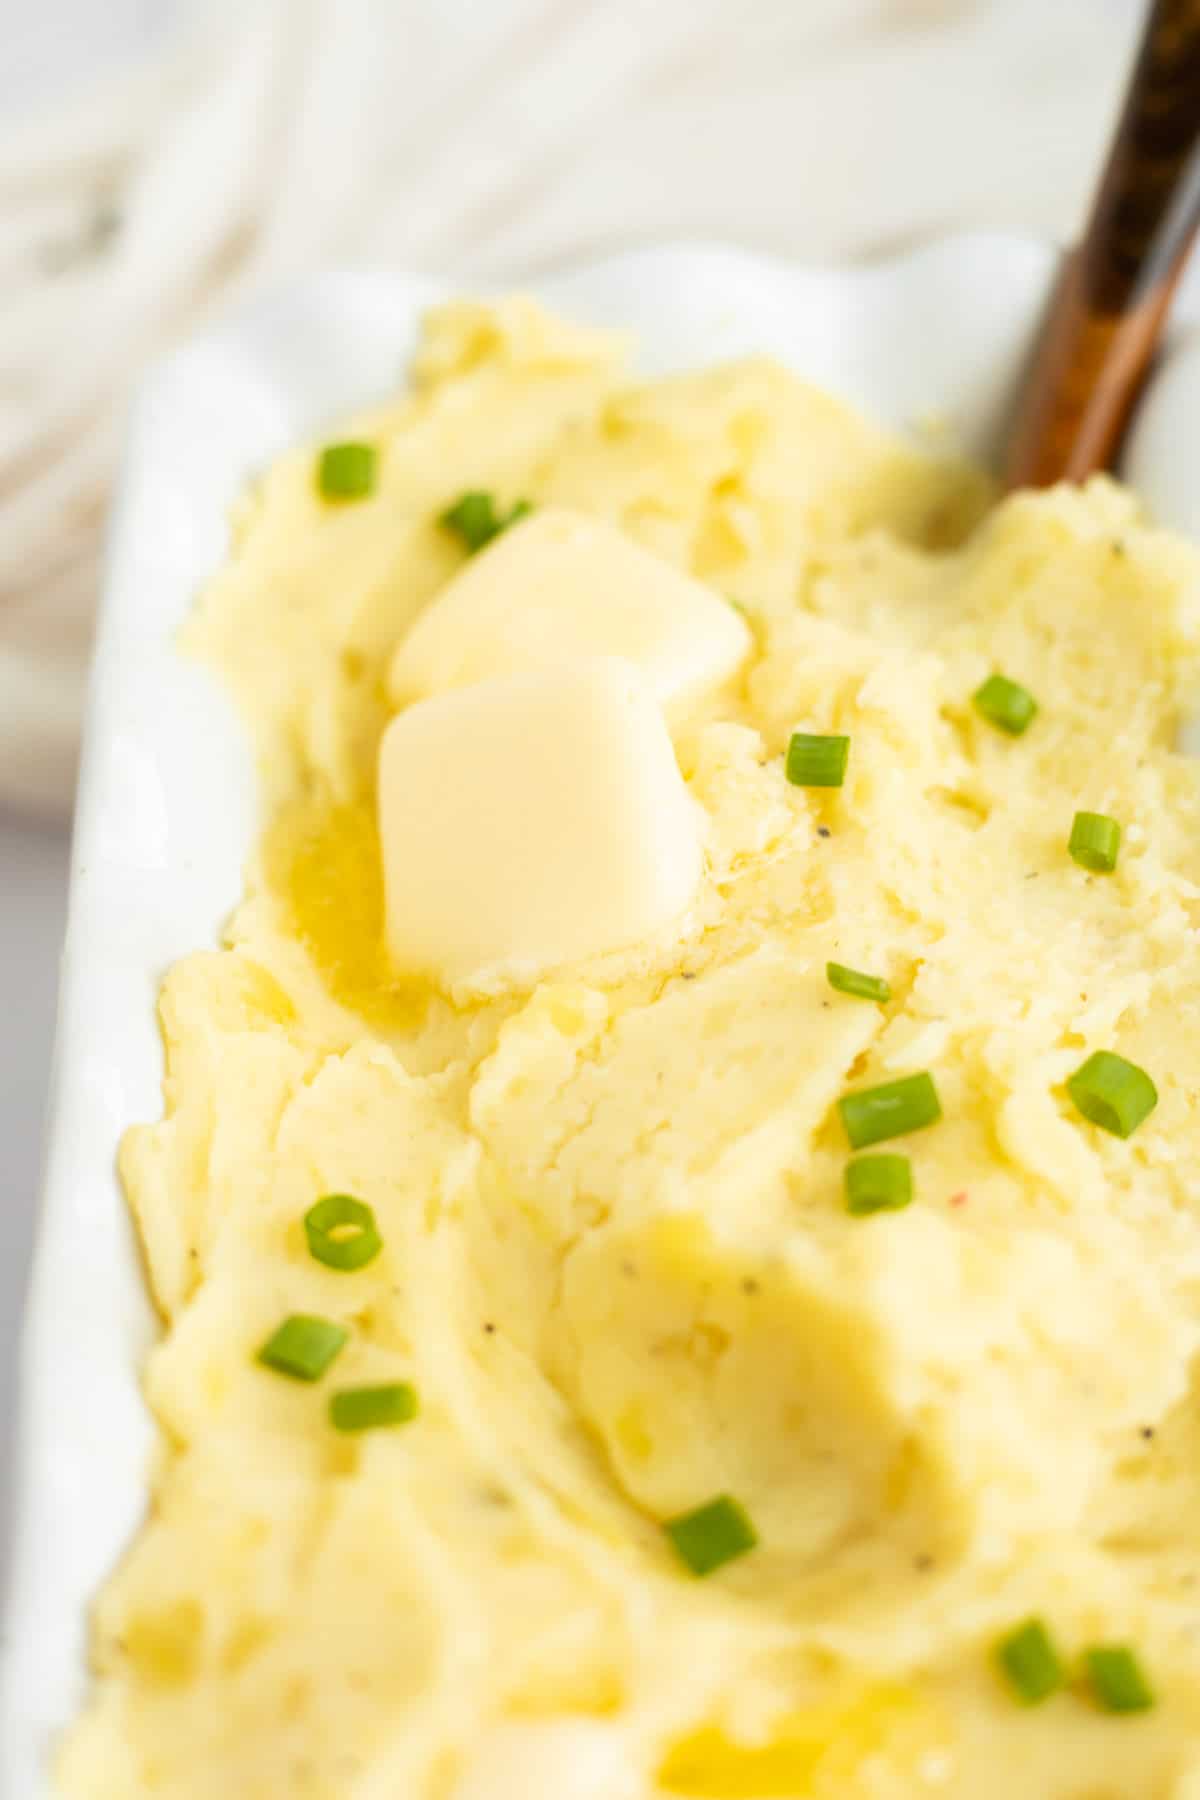 pats of butter on top of milk free mashed potatoes.